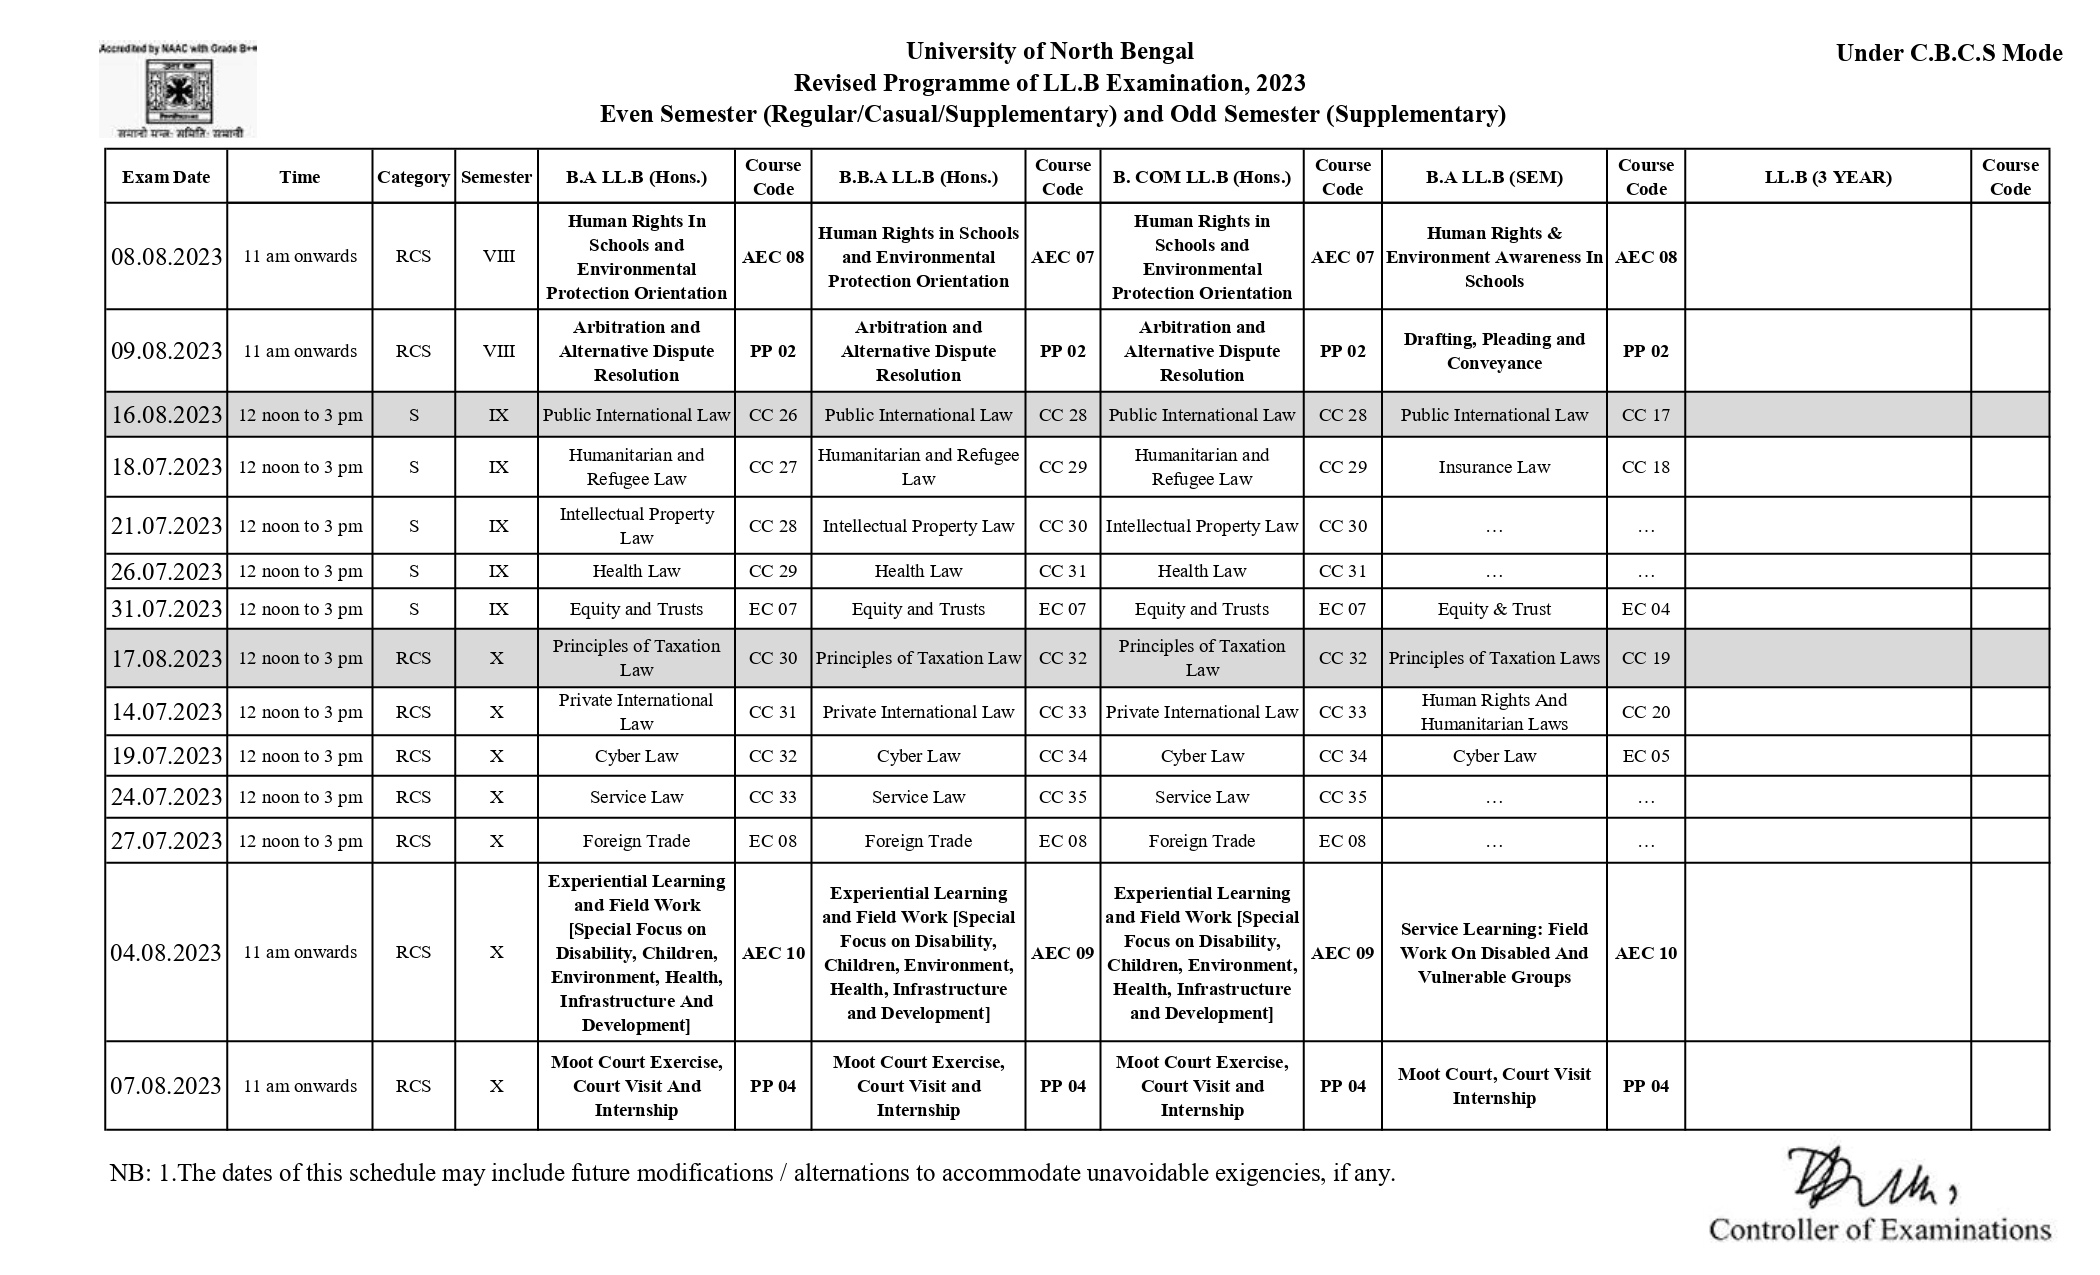 Revised Examination Schedule July 2023 (CBCS) Page 4